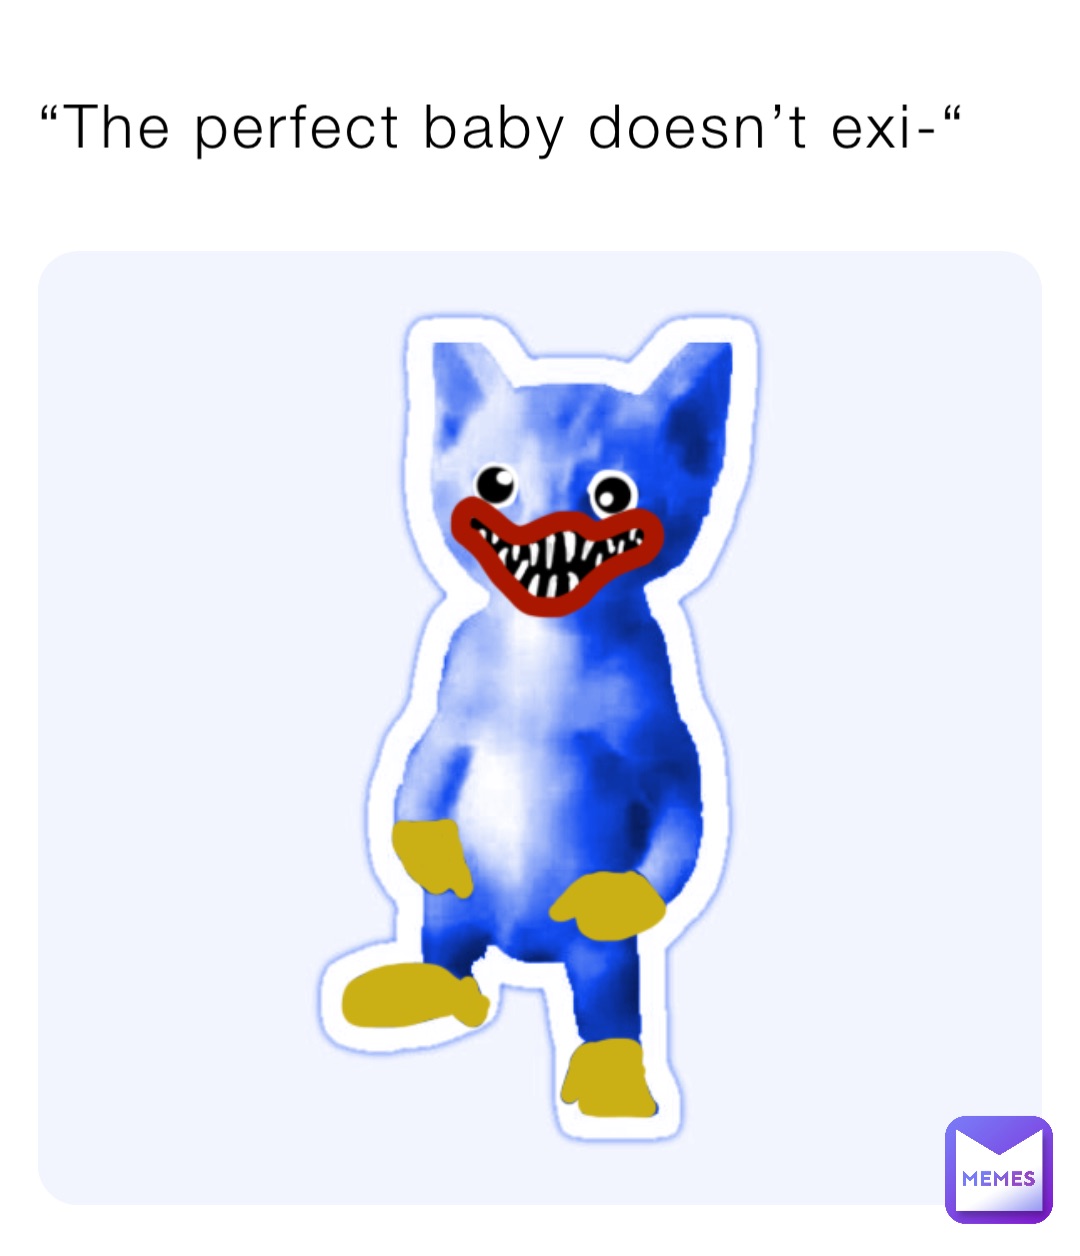 “The perfect baby doesn’t exi-“